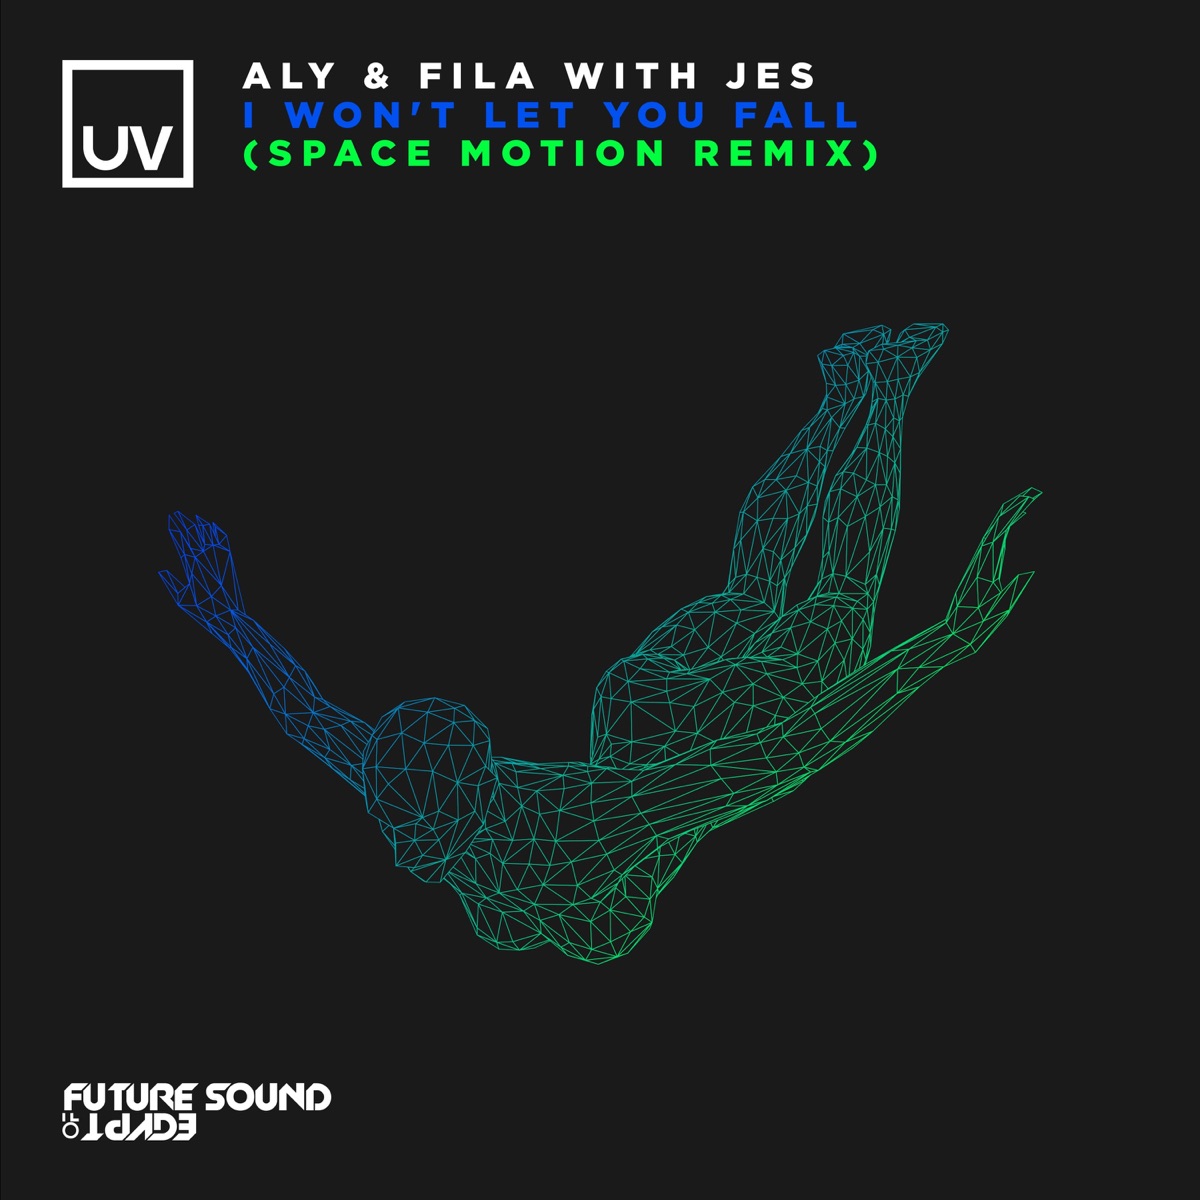 Beyond the Lights - Album by Aly & Fila - Apple Music